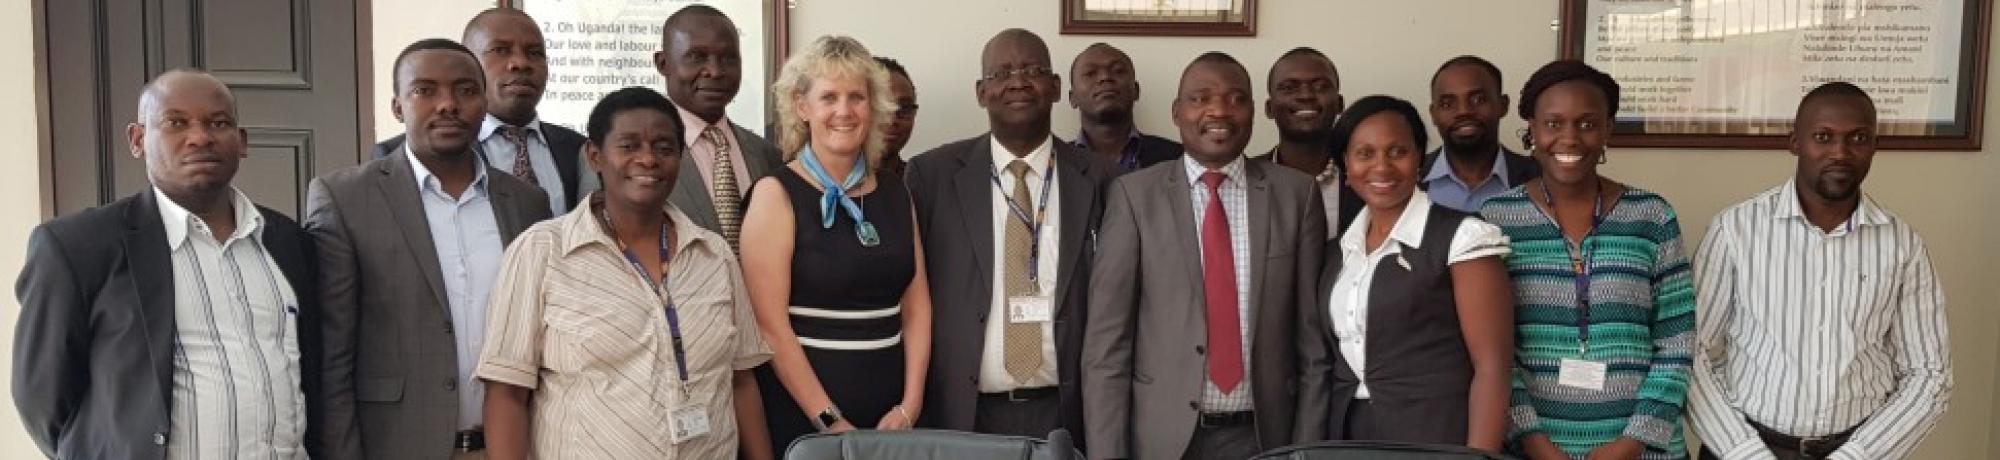 Dr. Alison Van Eenennaam with staff at the Ministry of Science, Technology and Innovation in Kampala